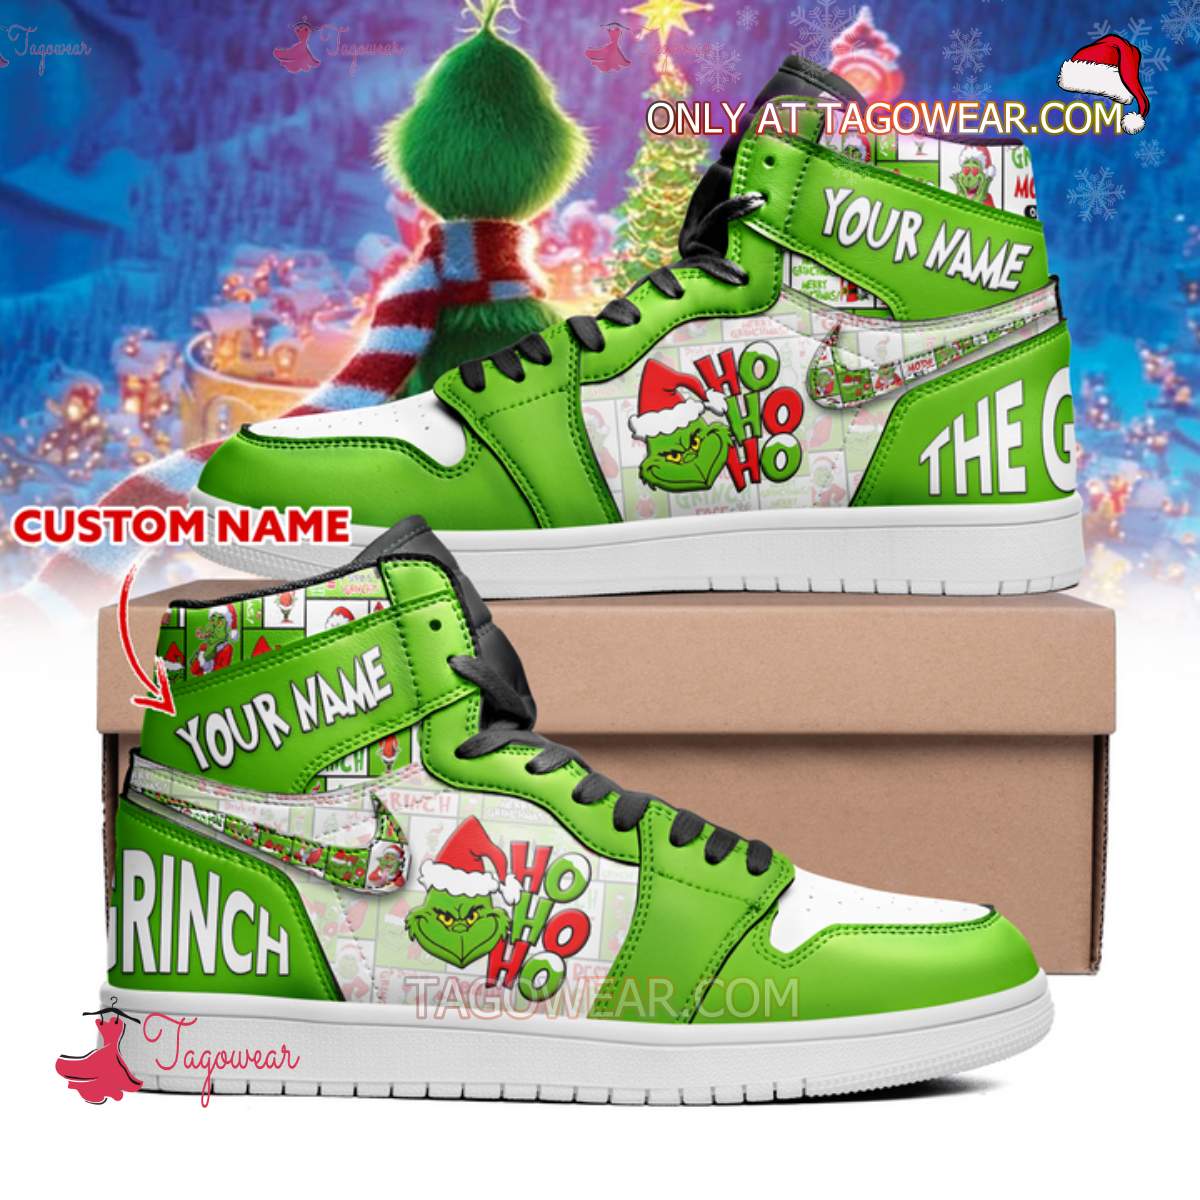 The Grinch Ho Ho Ho Personalized Air Jordan High Top Shoes